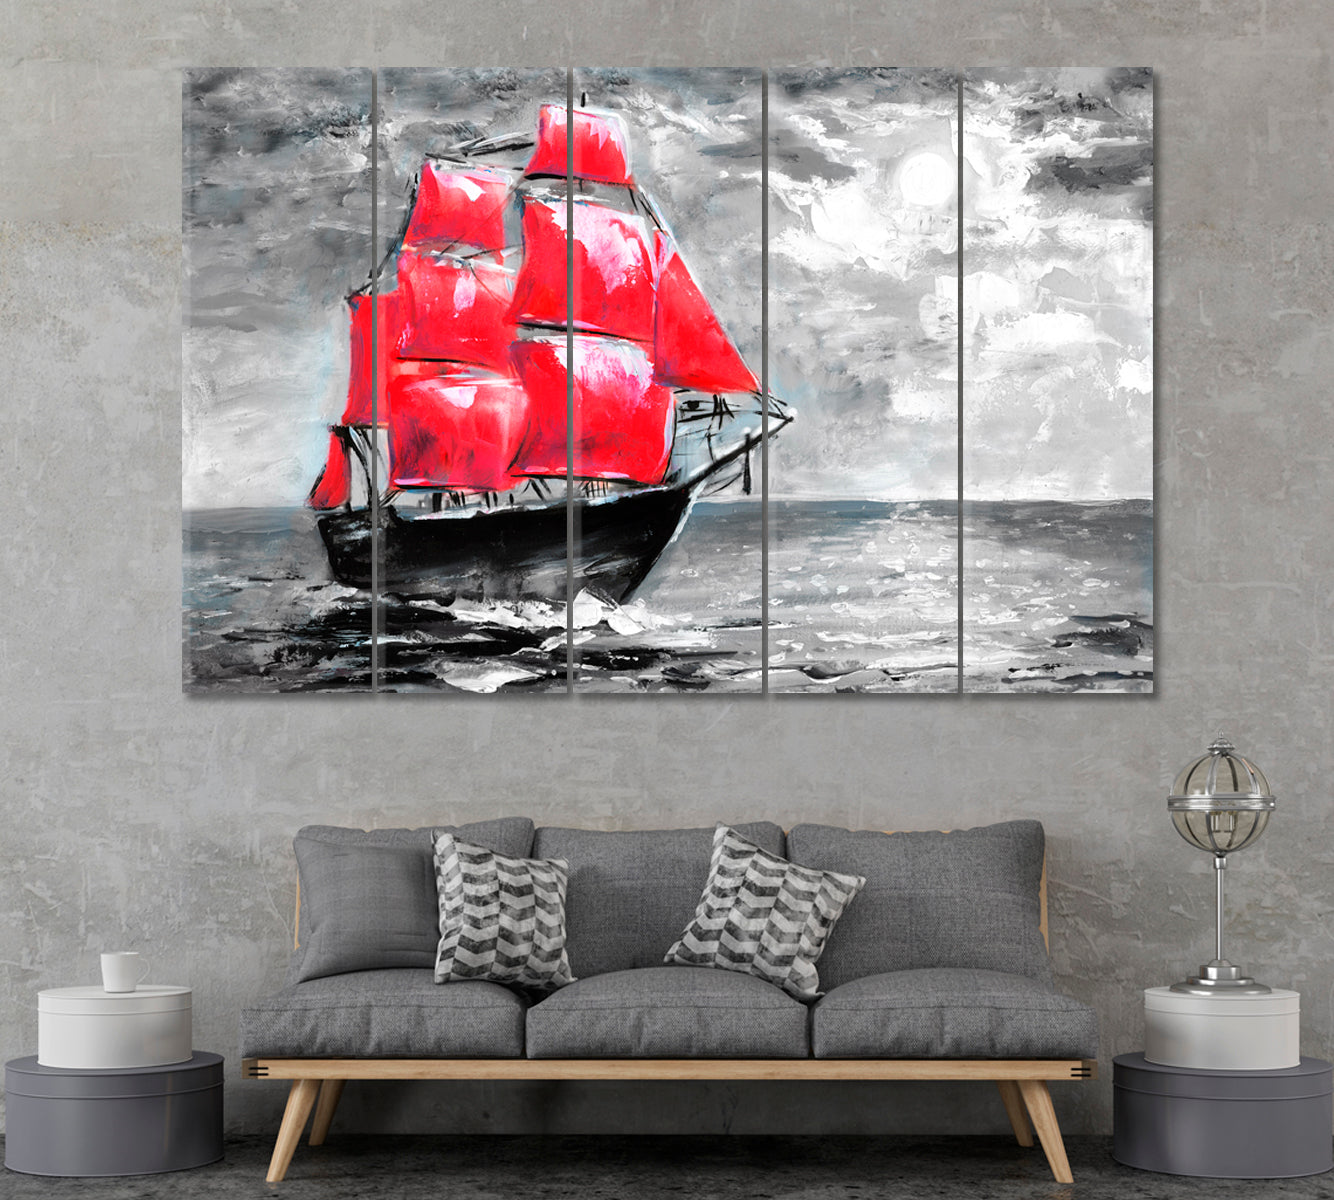 Scarlet Sails Canvas Print ArtLexy 5 Panels 36"x24" inches 